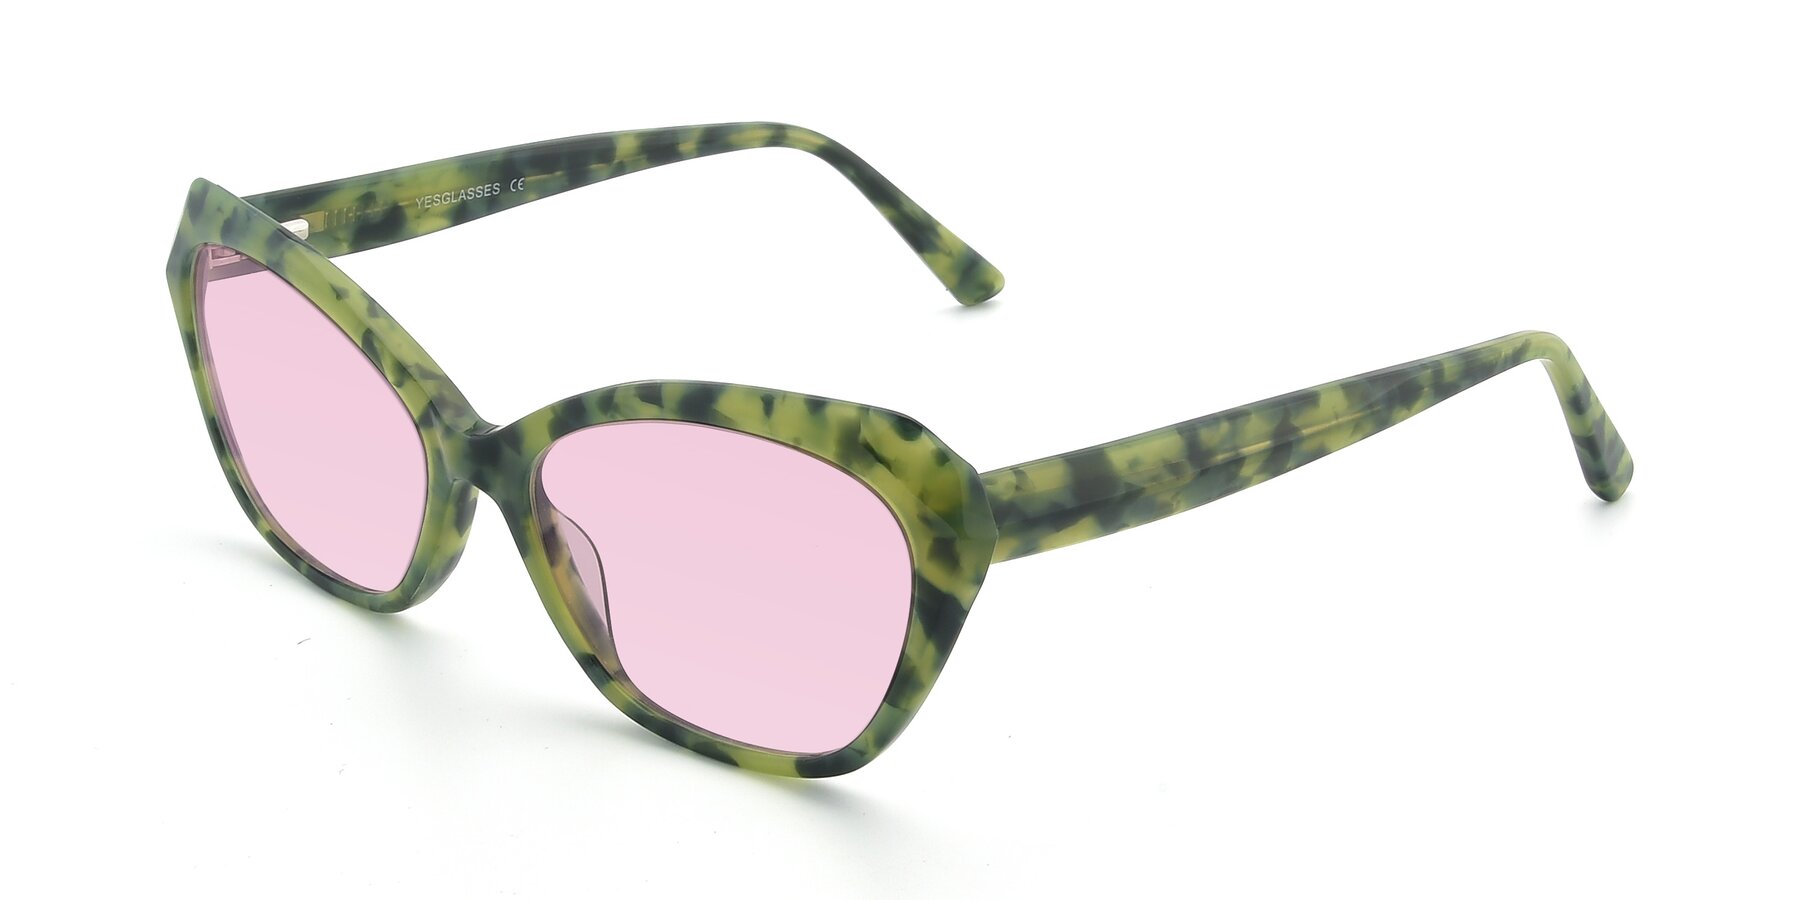 Angle of 17351 in Floral Green with Light Pink Tinted Lenses